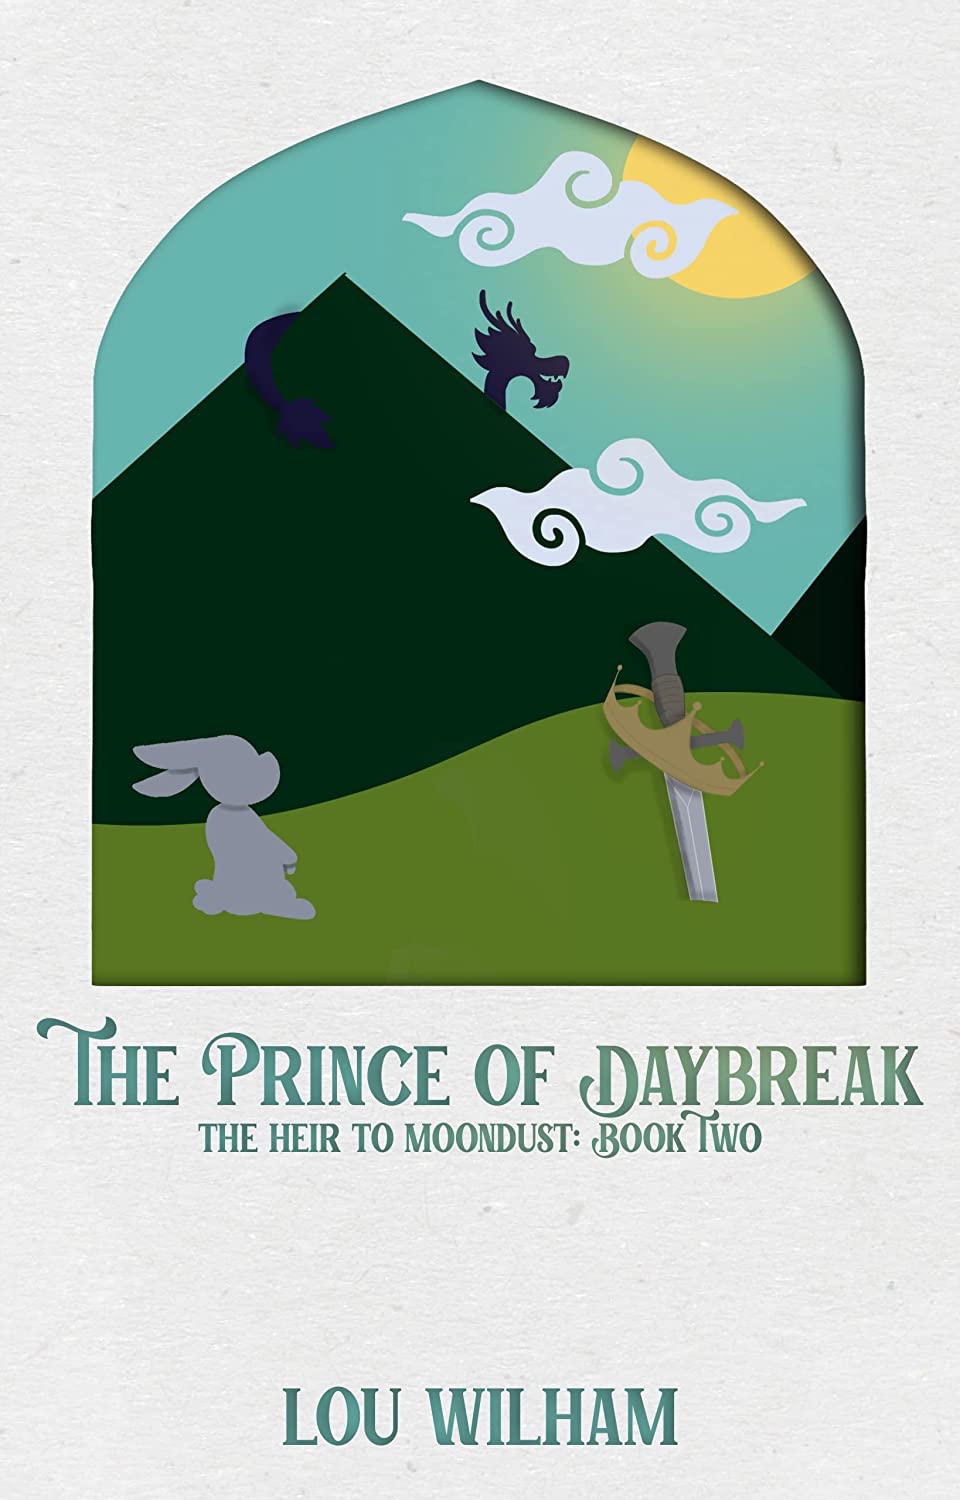 The Prince of Daybreak by Lou Wilham